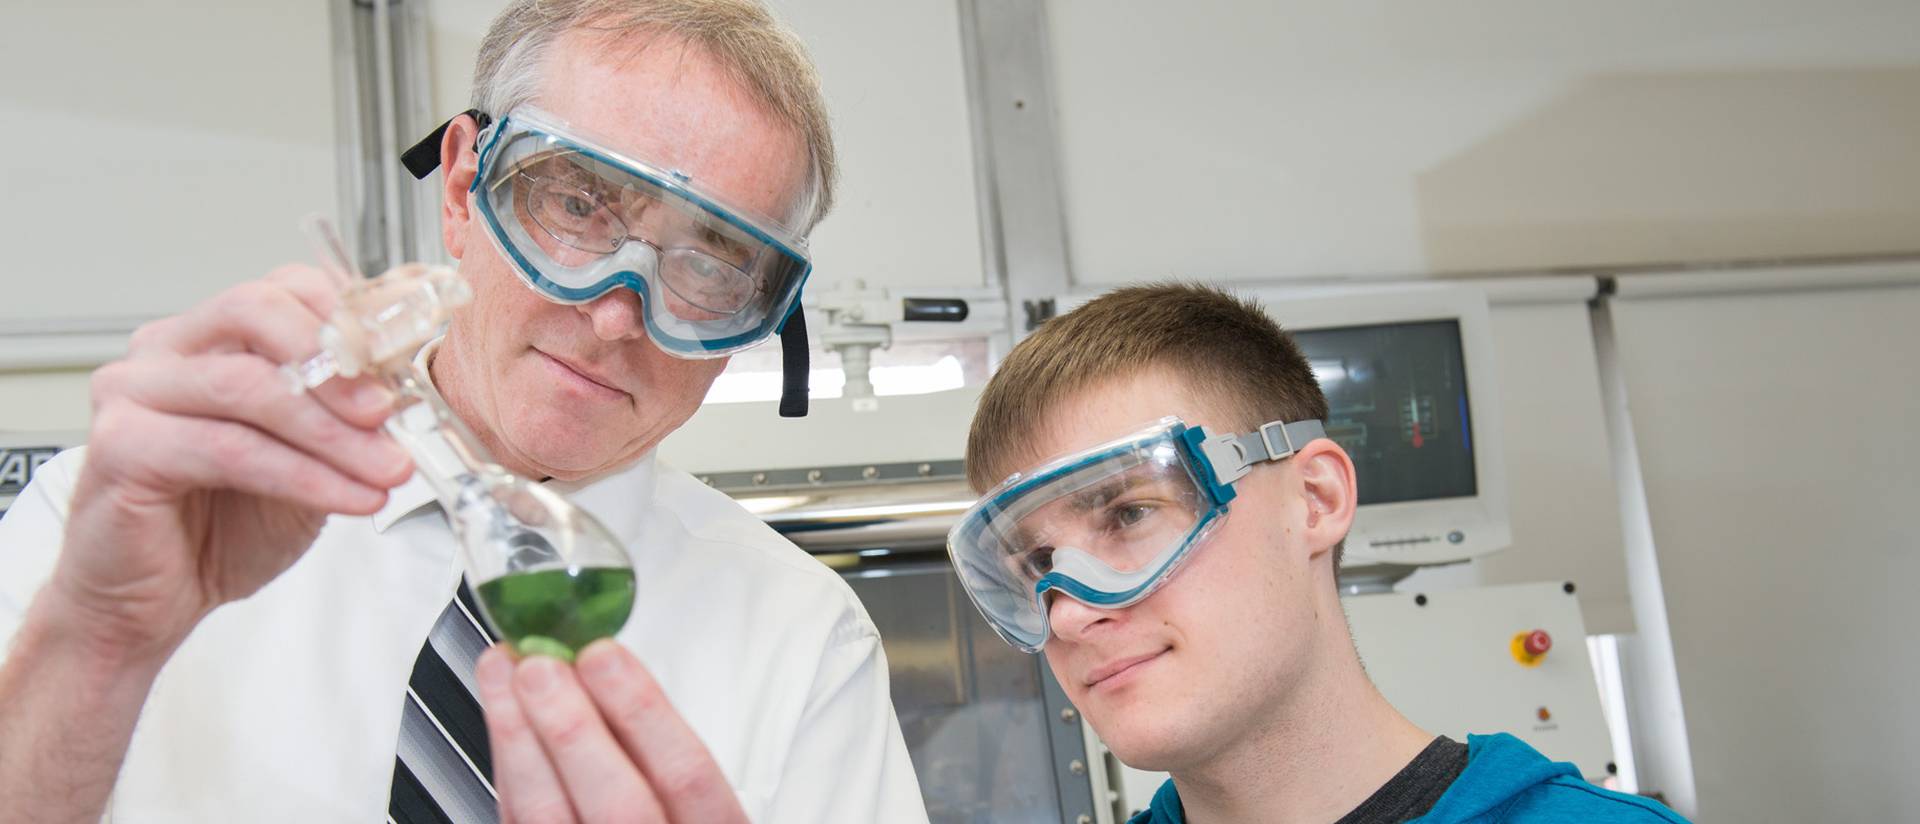 Three generations of Blugold chemists develop new methods for reducing plastic waste